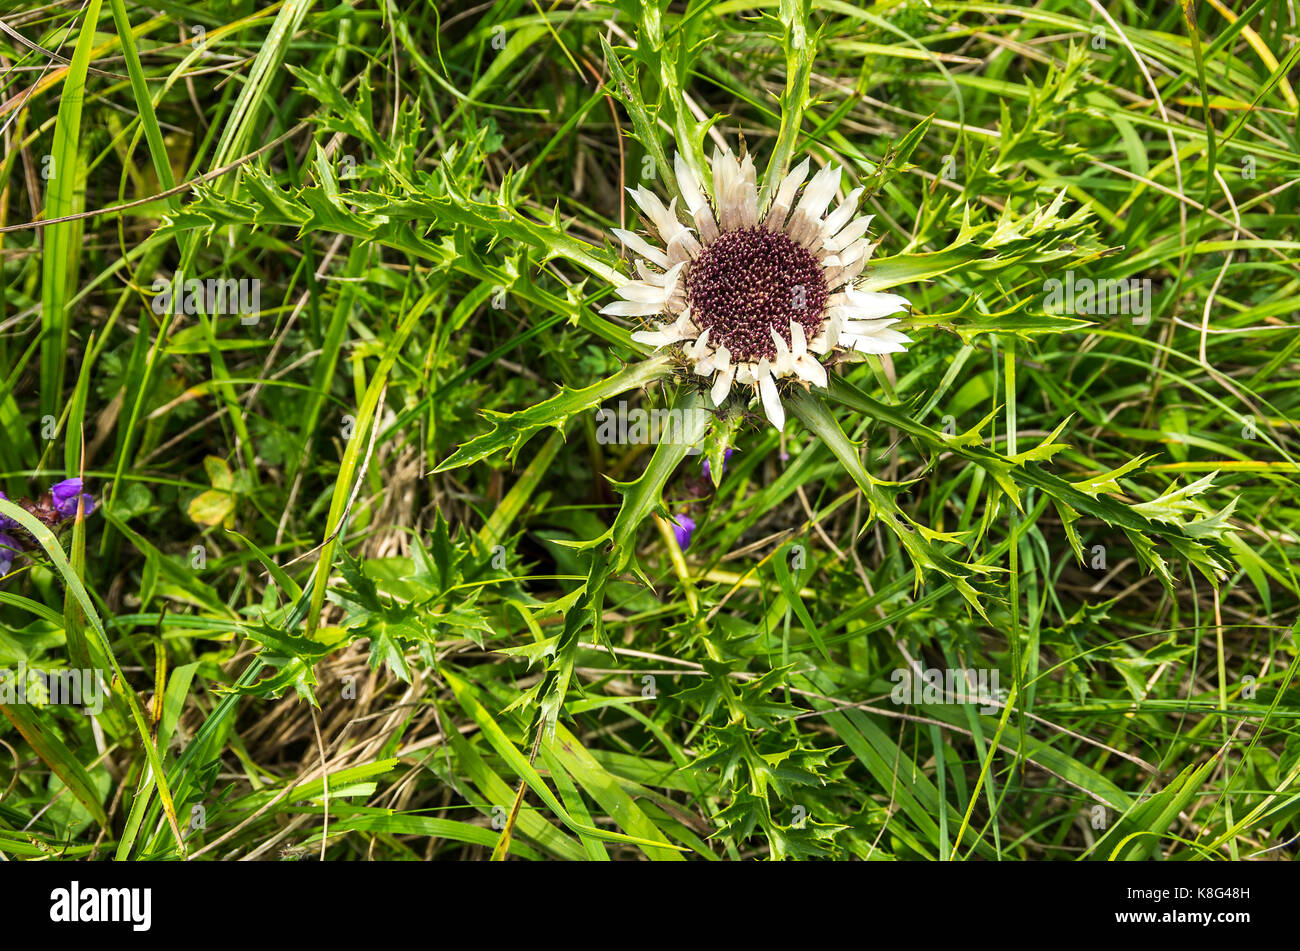 Flowering specimen of a thistle plant, here a silver thistle, Carlina acaulis. Stock Photo